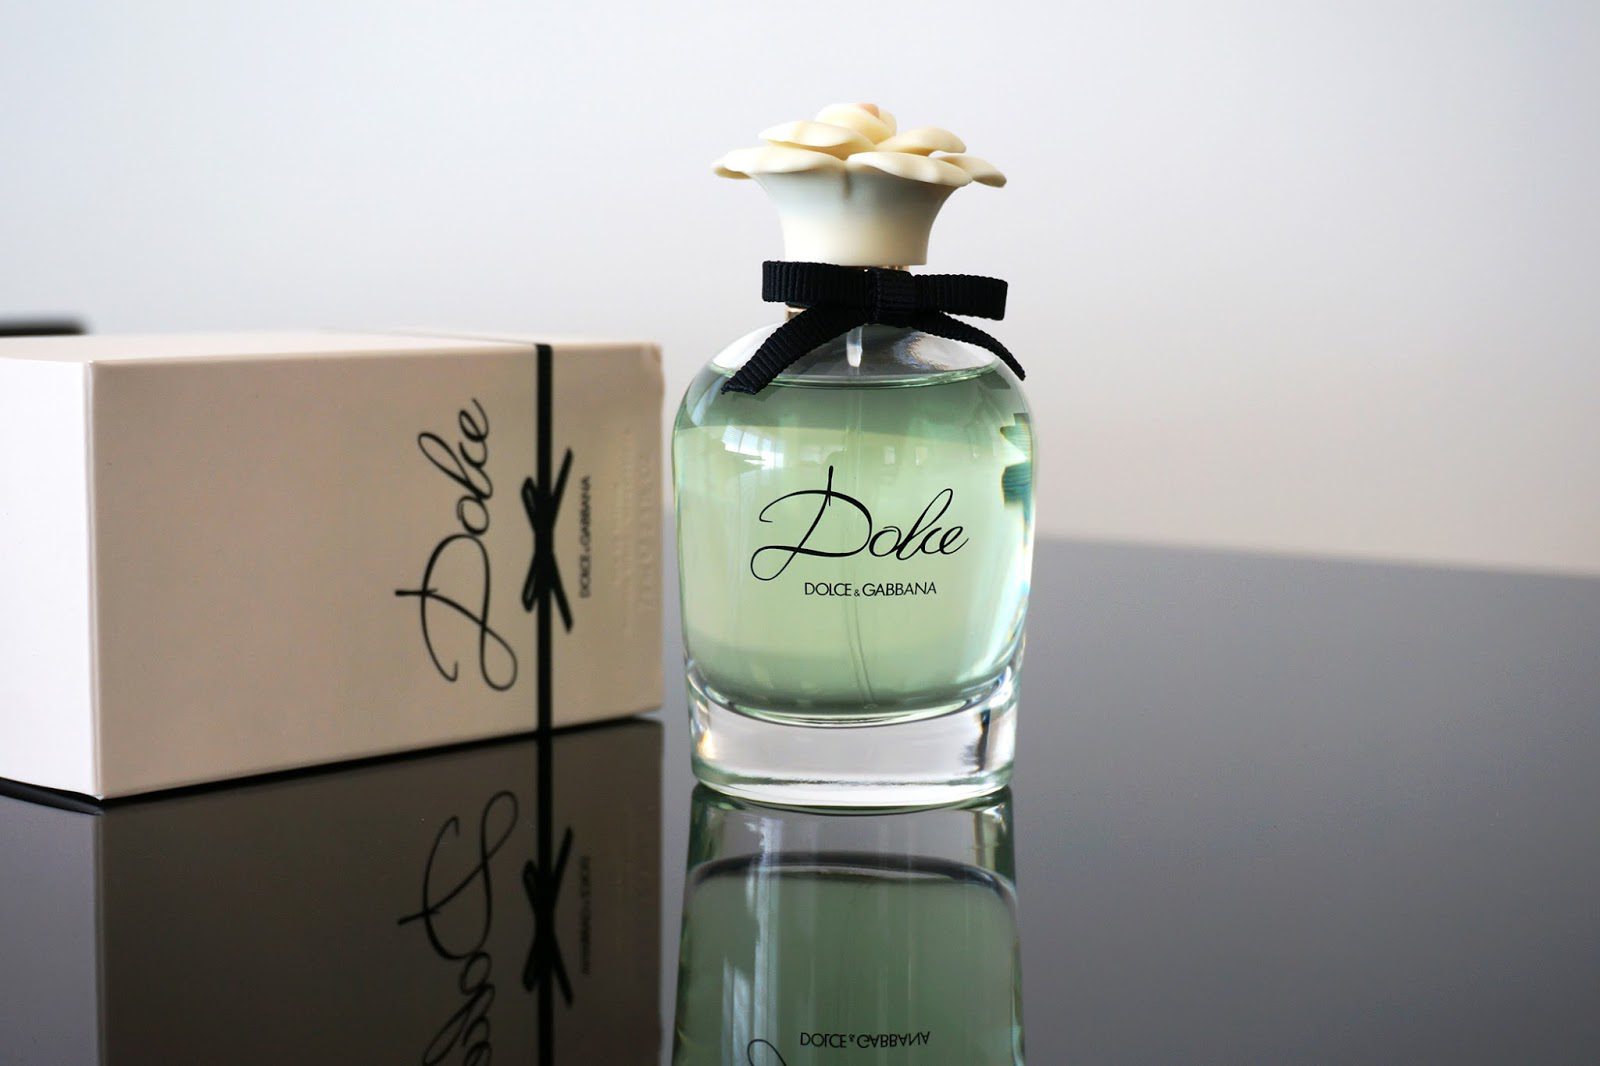 dolce and gabbana dolce perfume review